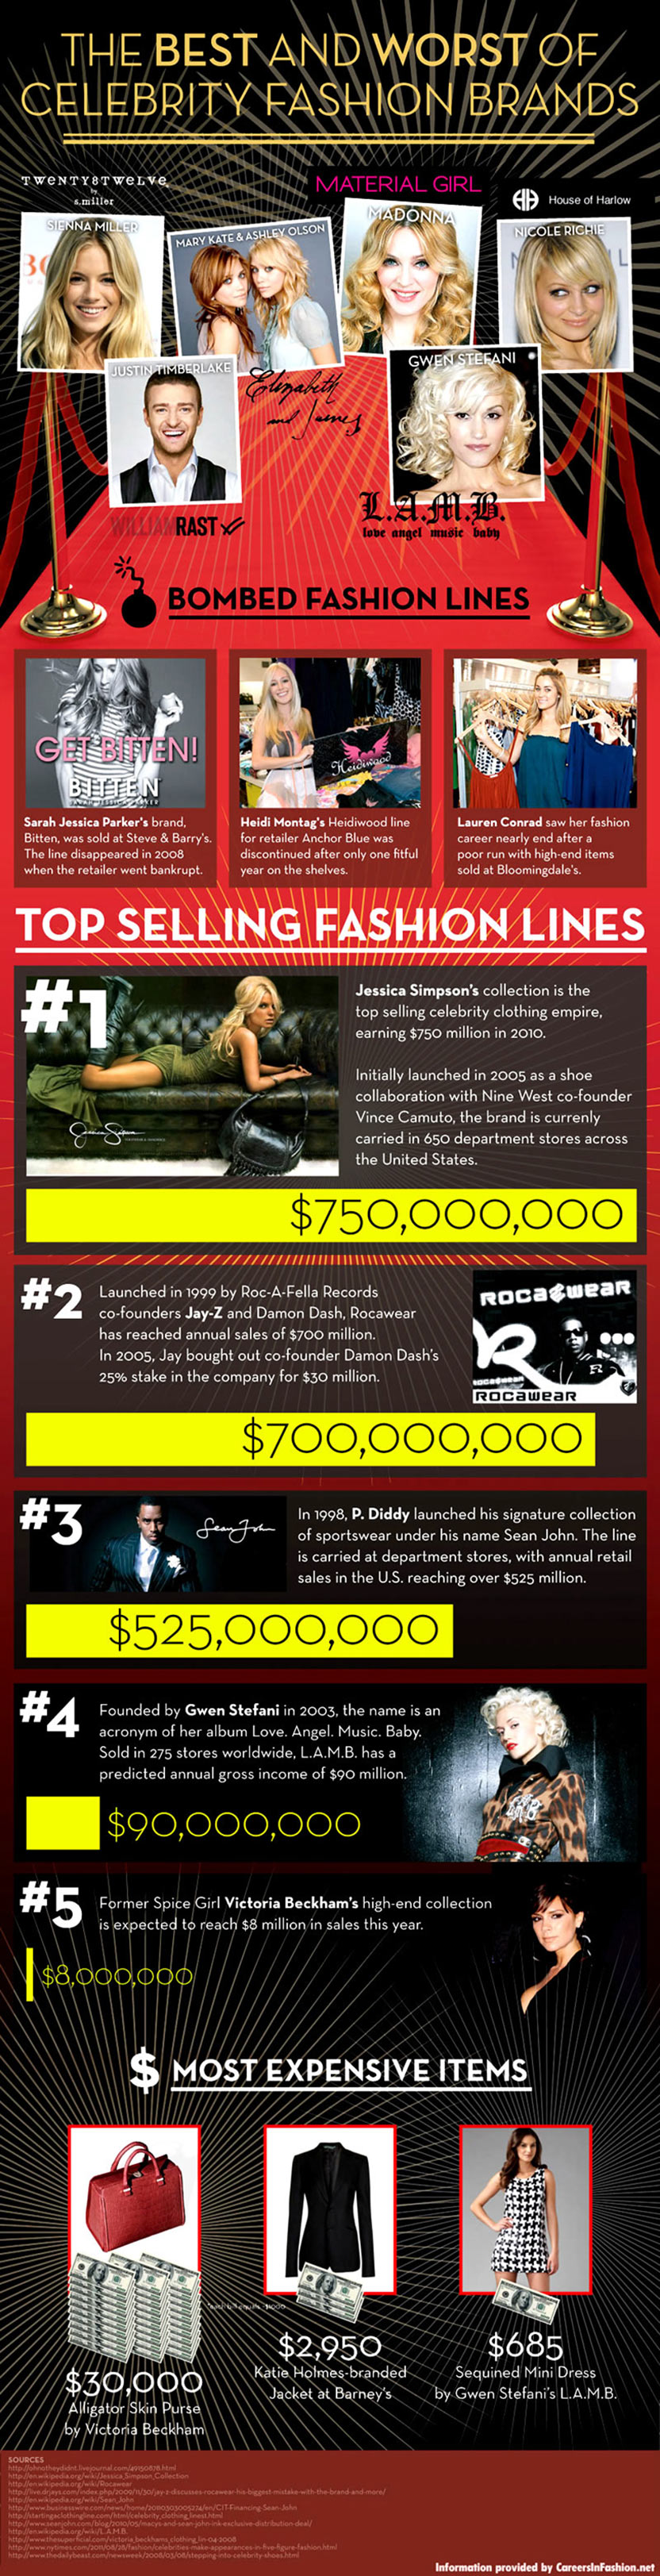 The Best and Worst of Celebrity Fashion Brands Infographic